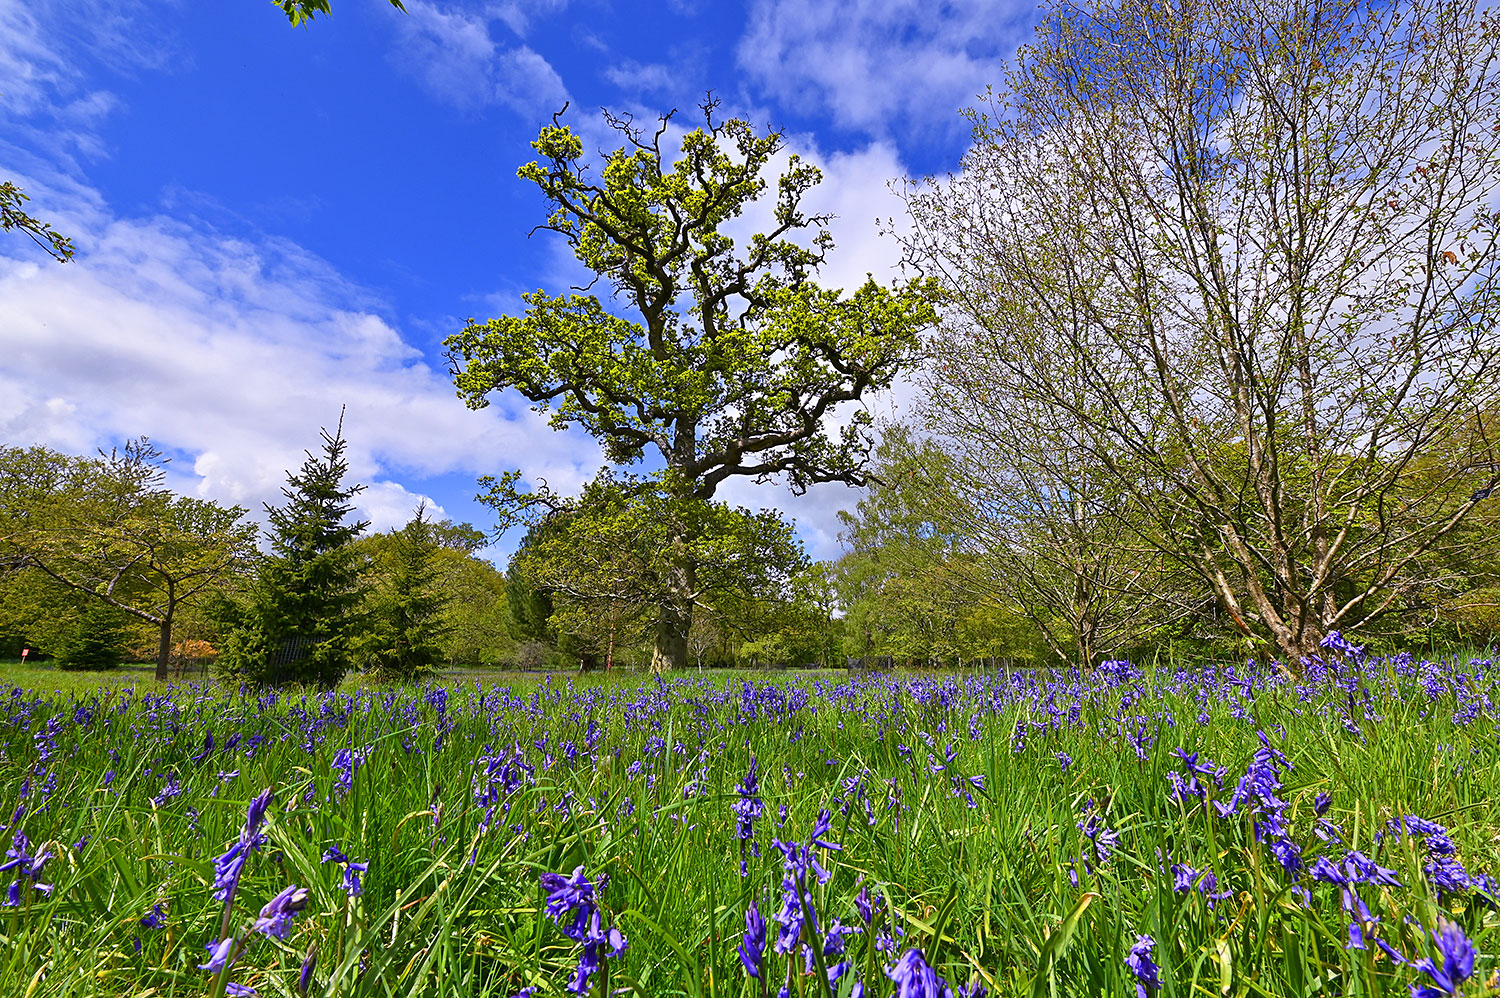 Picture of a big beautiful tree with big branches behind a field of Bluebells